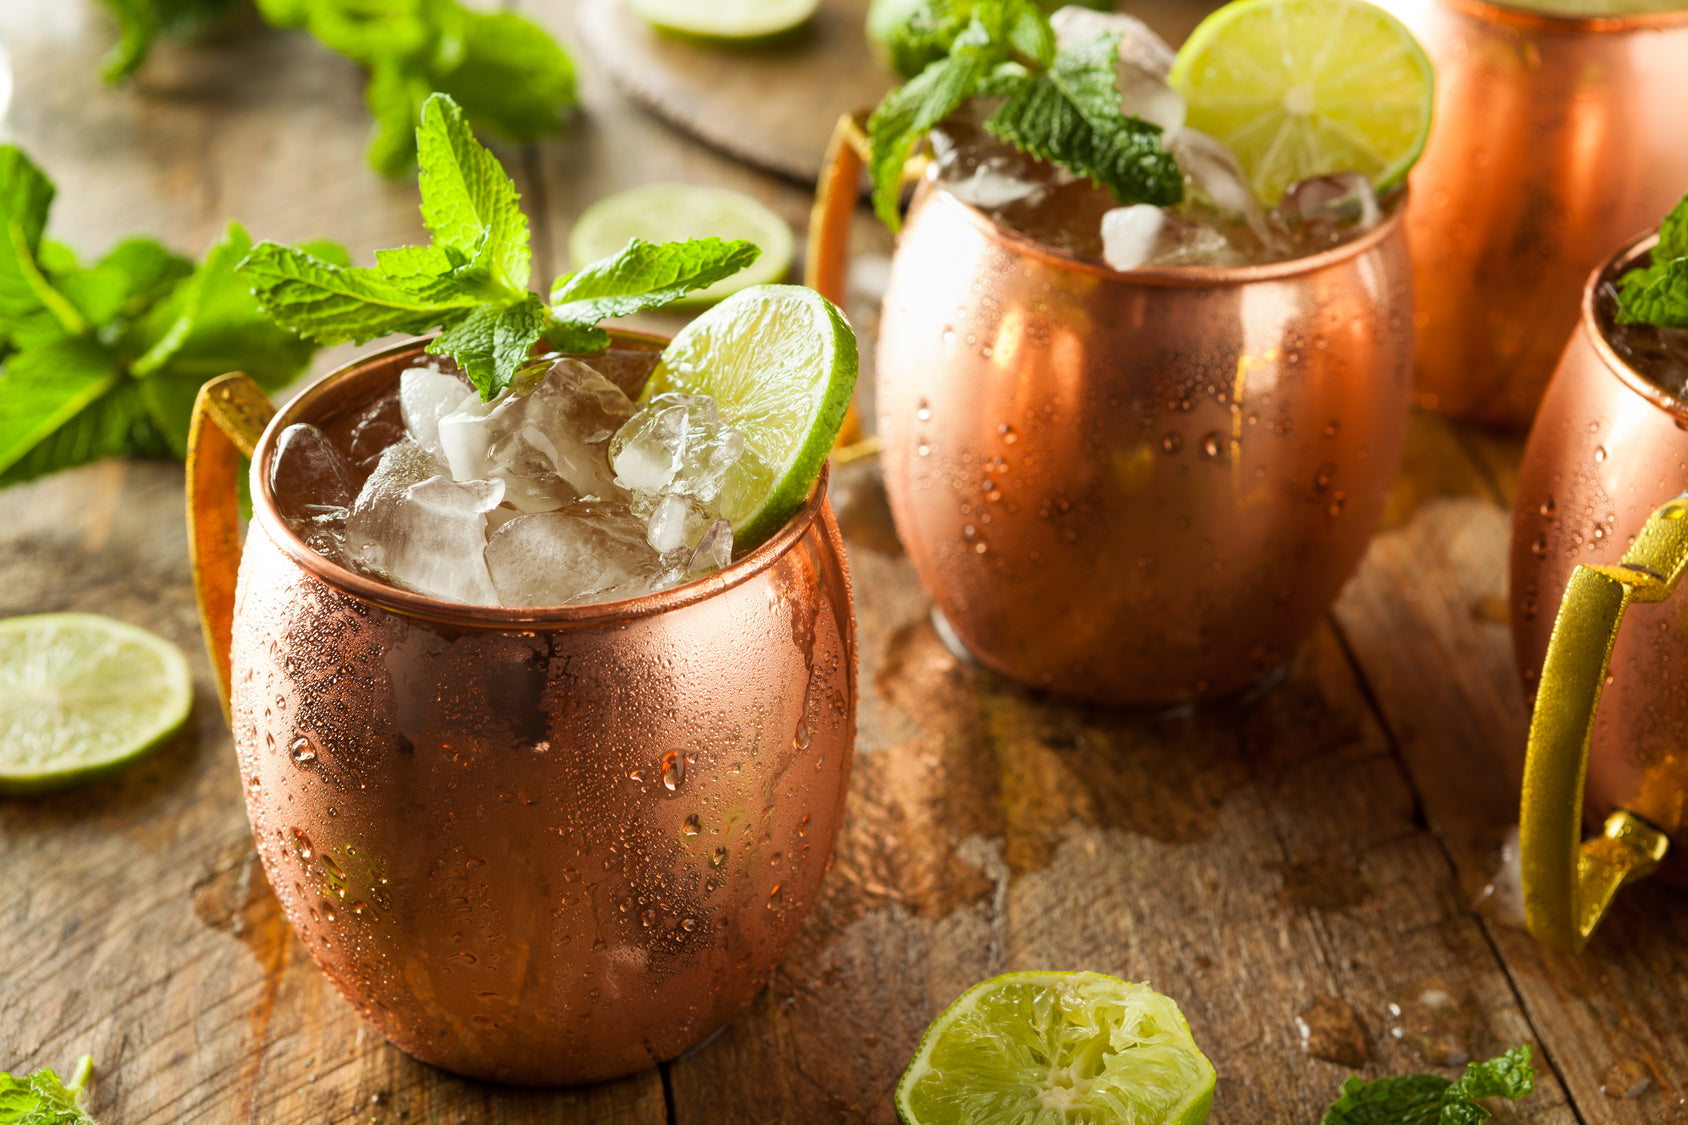 Fill Your Copper Mug And Let's Toast To National Moscow Mule Day!